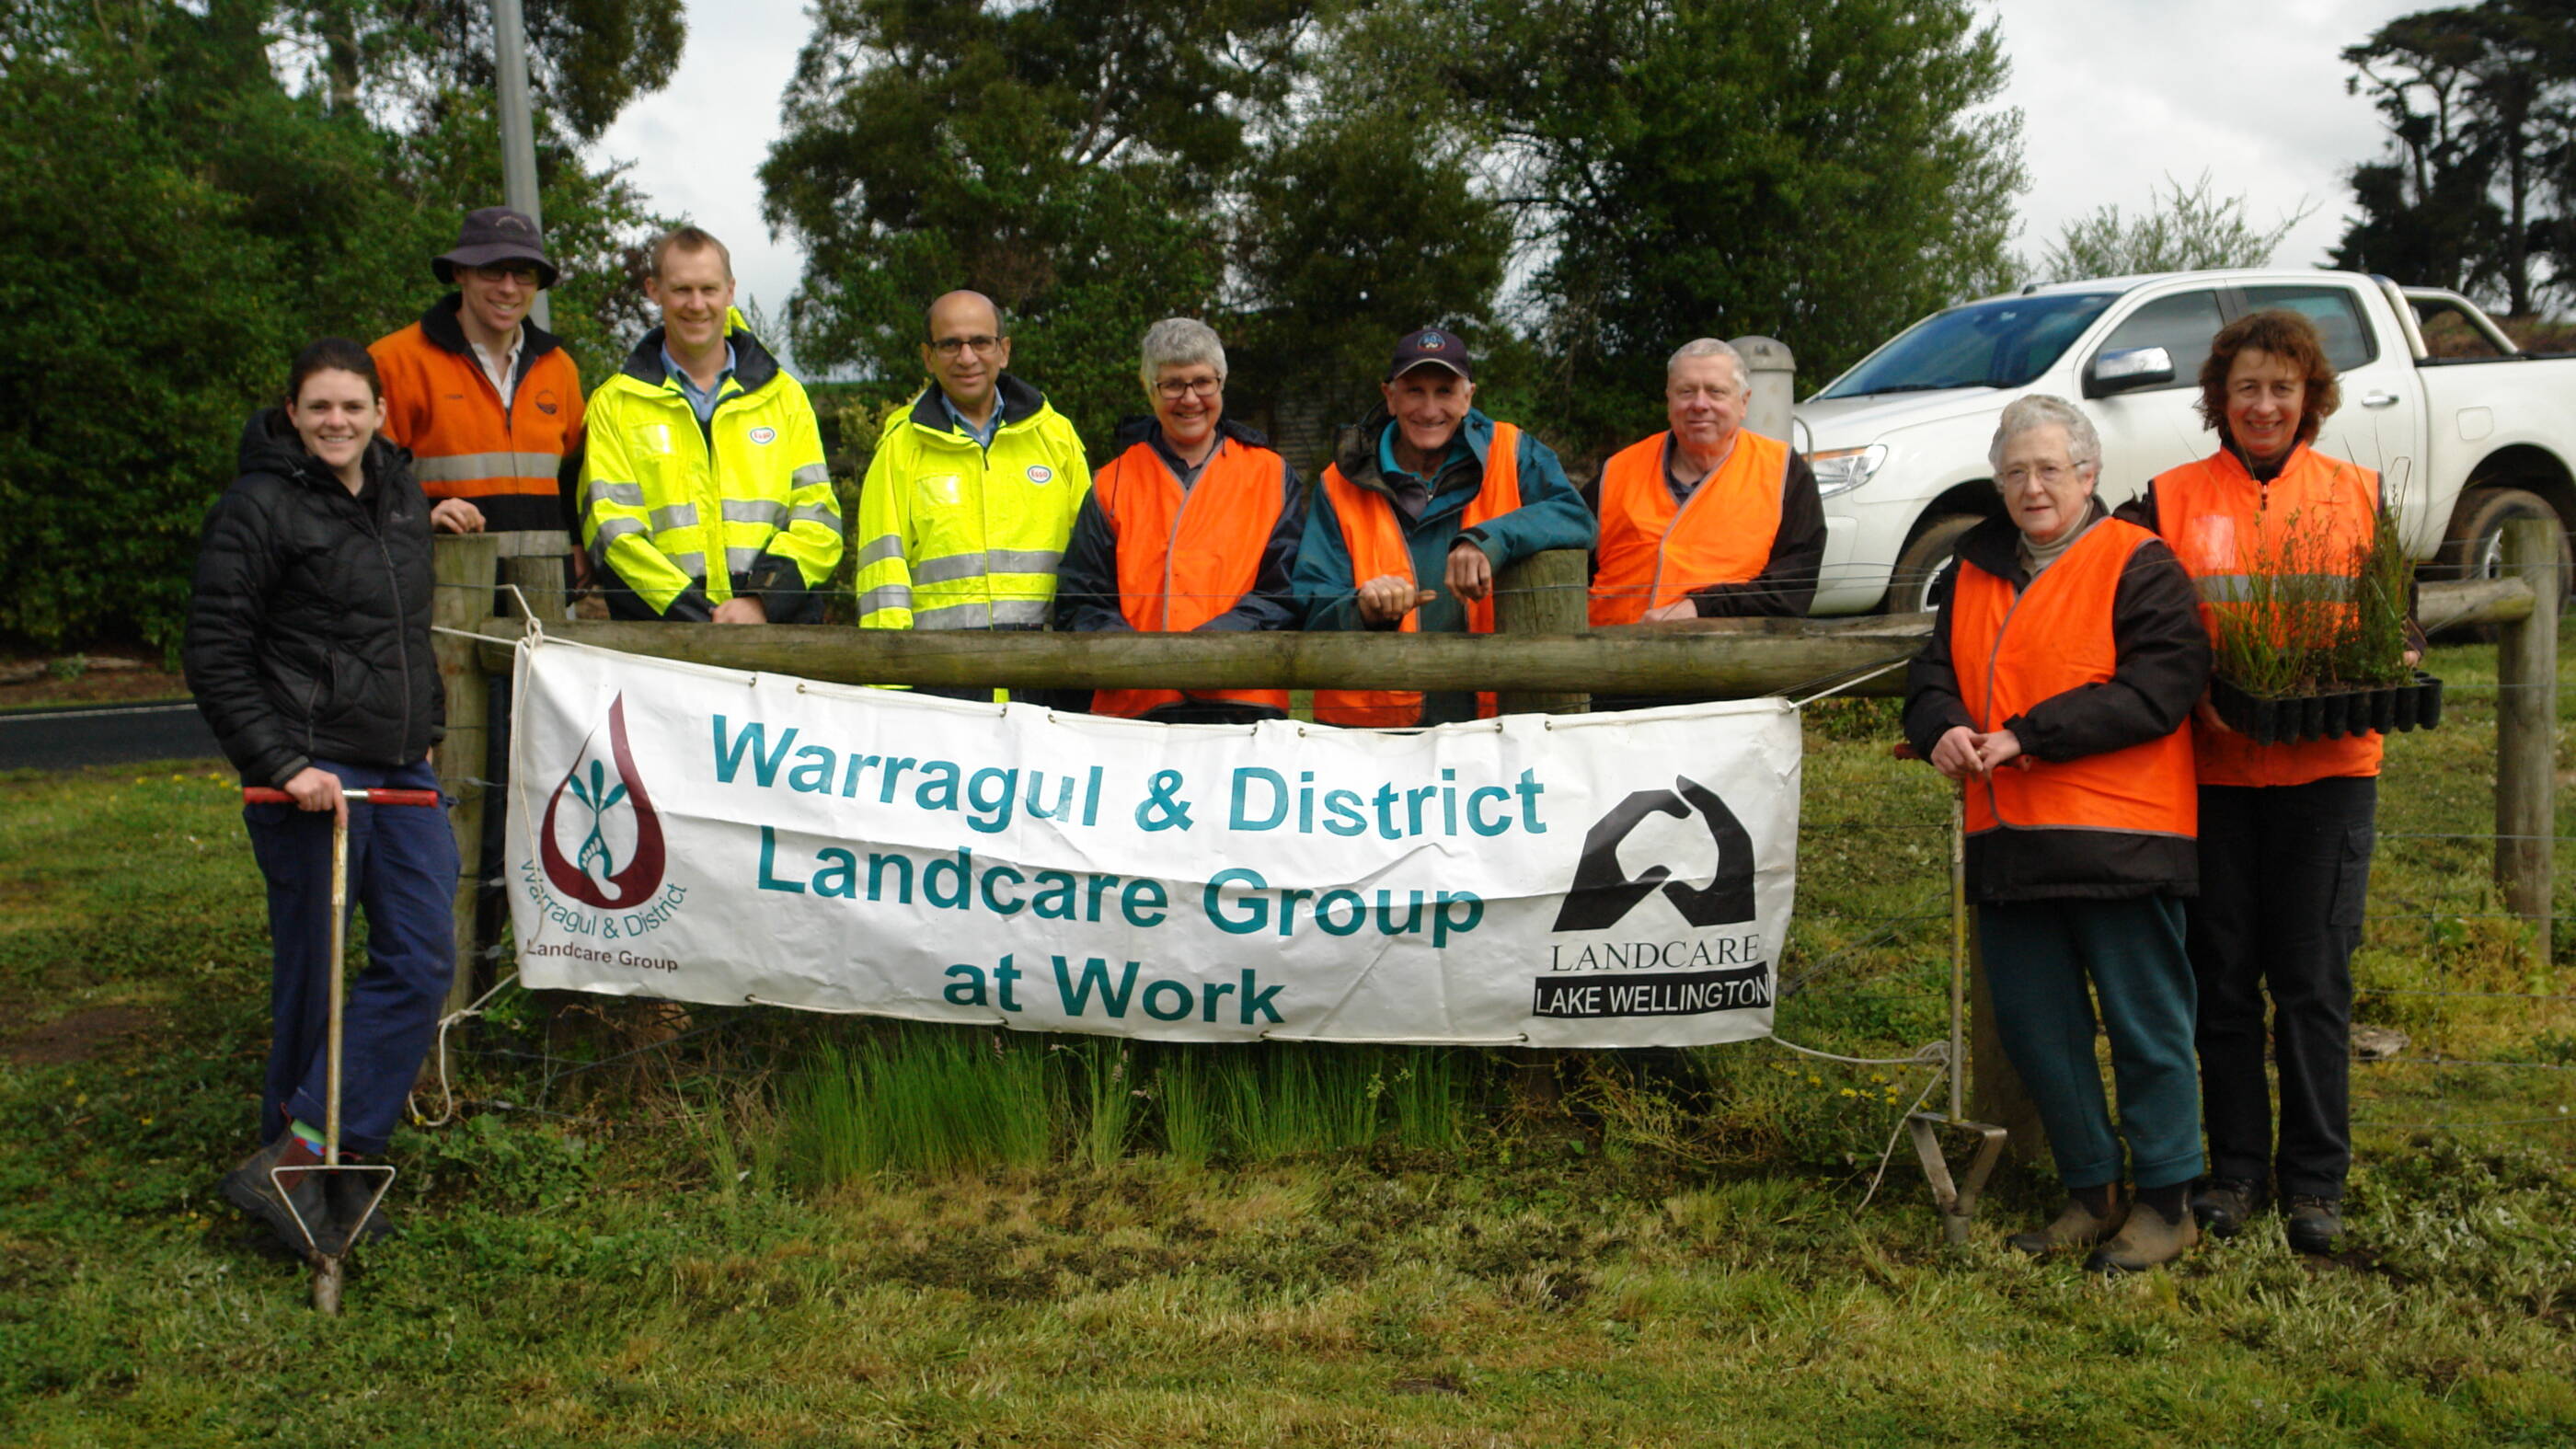 Image Photo — Esso employees recently joined Baw Baw Shire Council, the Warragul Urban Landcare group and Landcare Australia to undertake planting works at Moroka Reserve in Warragul.